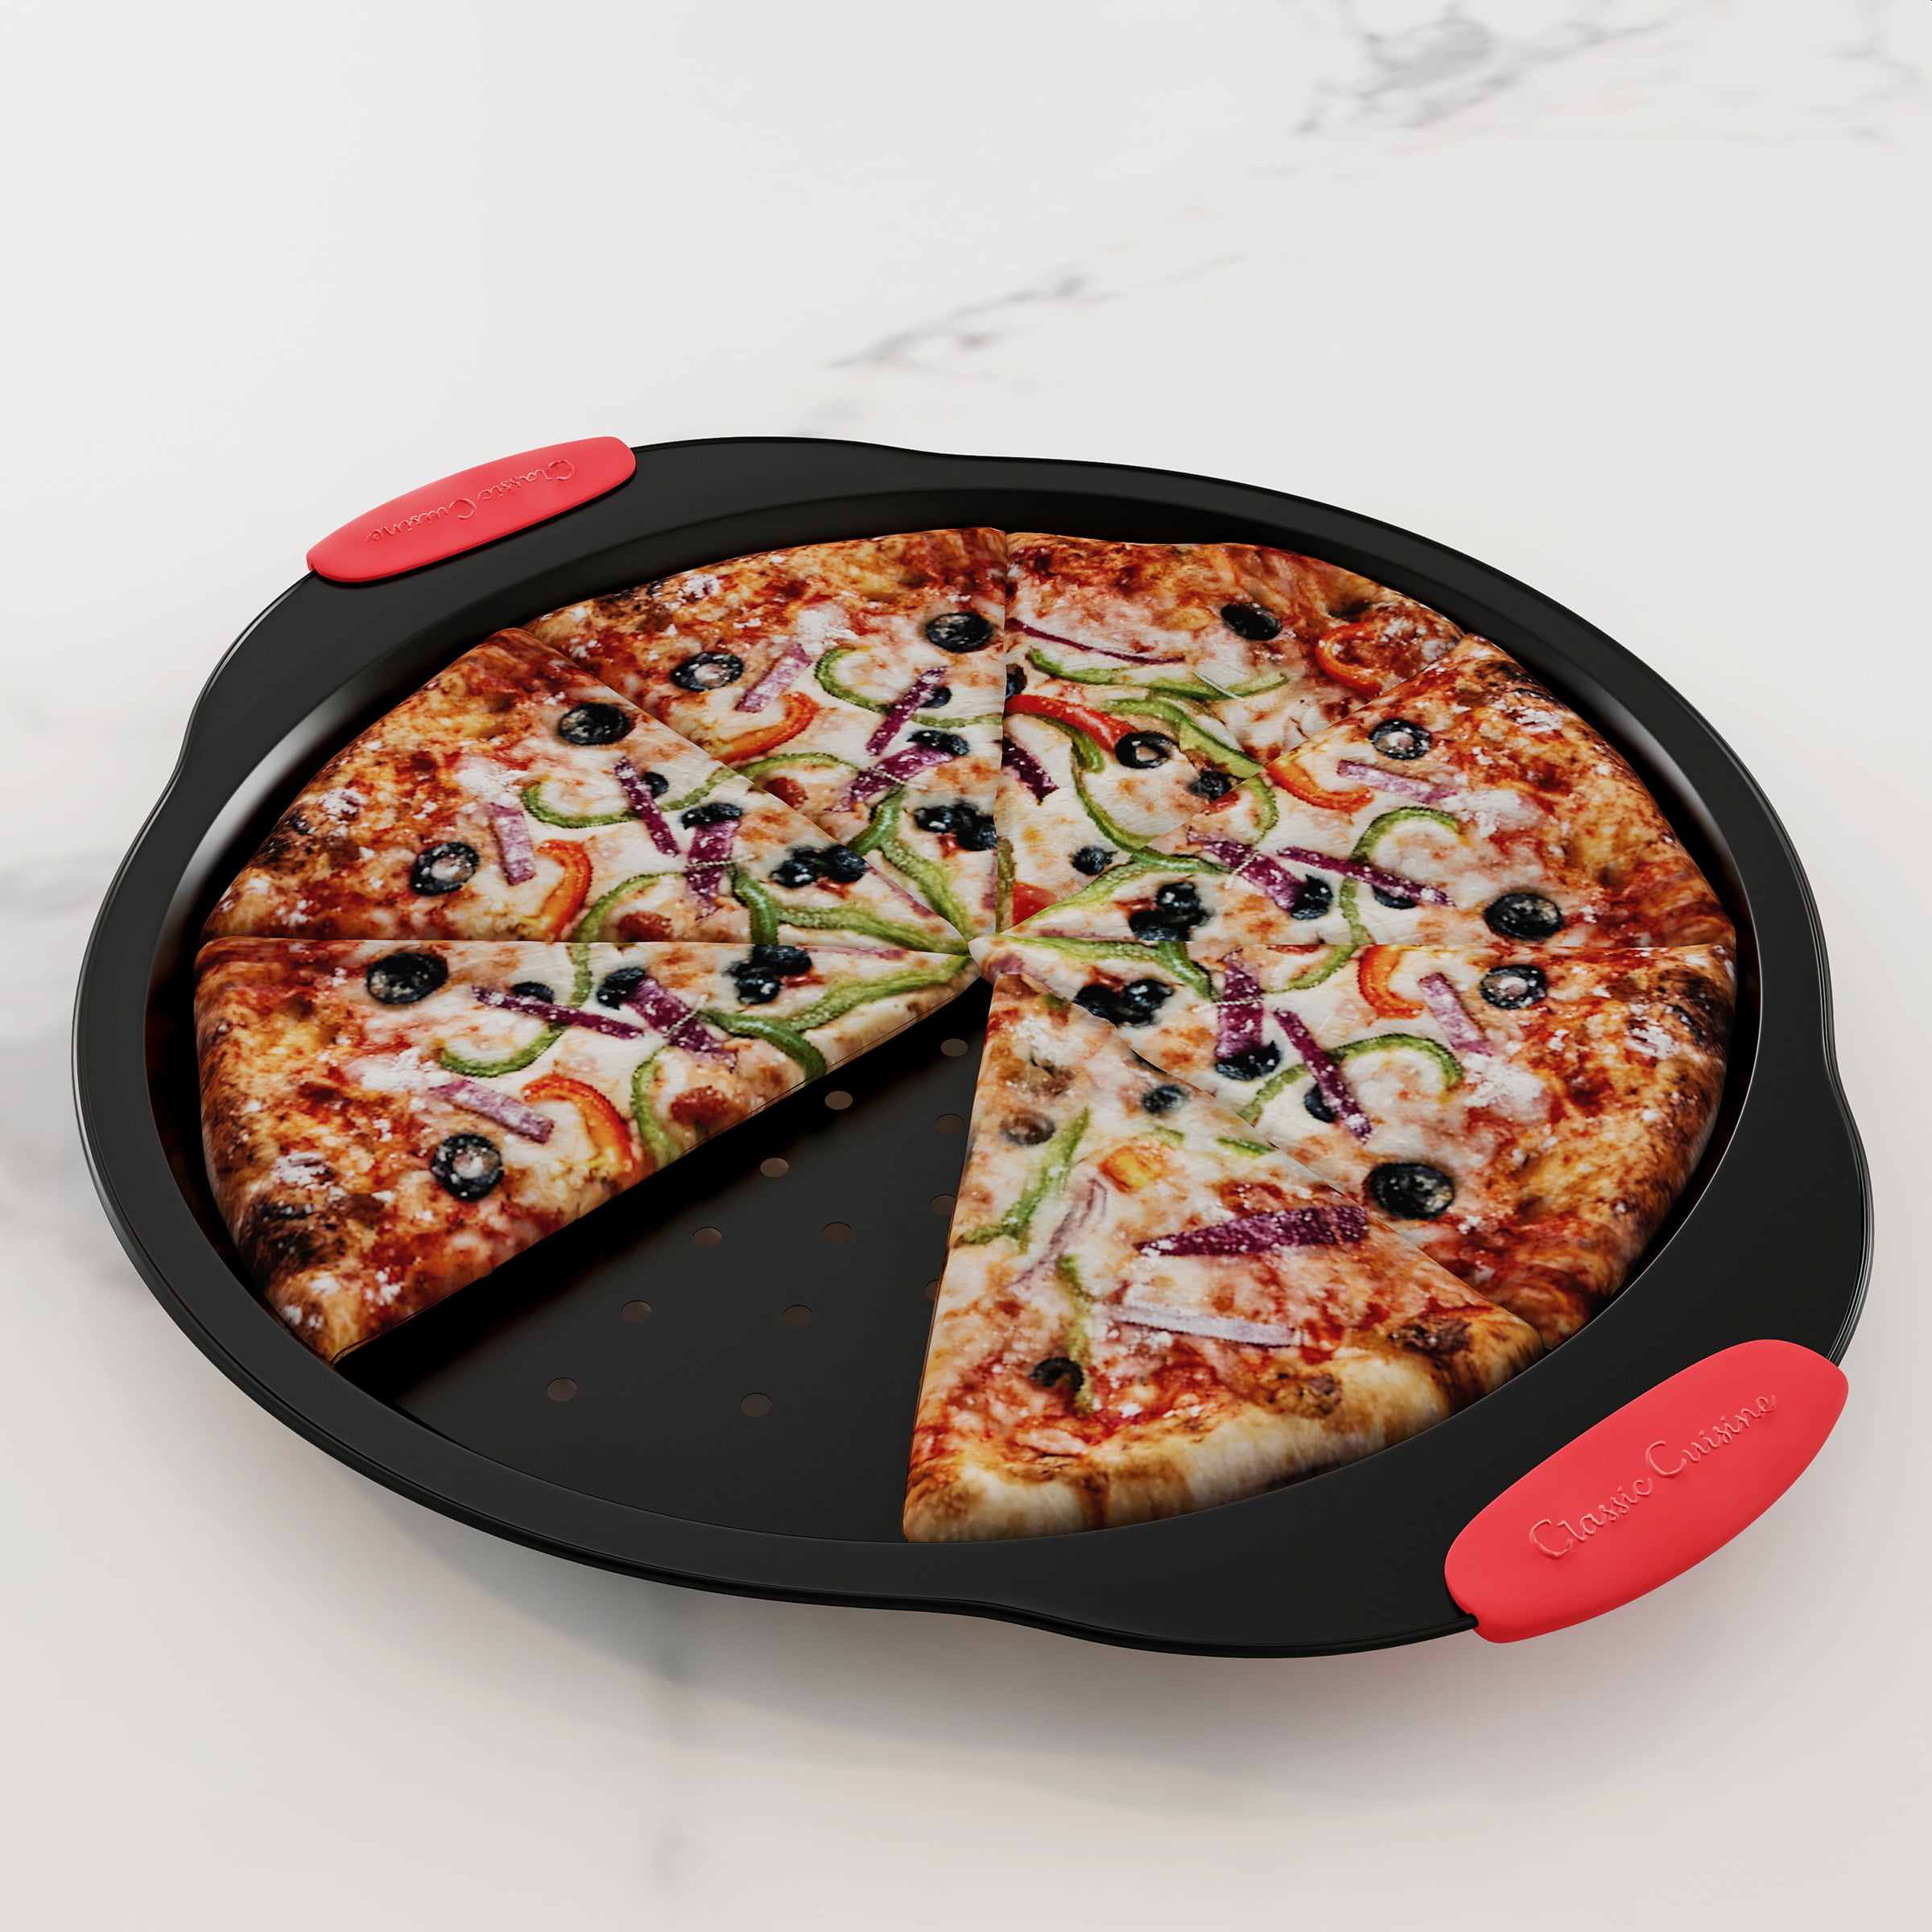 Hemoton 8 Inches Pizza Pan Even Heating Accessories Non Stick Tray Kitchen Tools Plate Hole Home Mold Baking Bakeware Perforated Aluminum Alloy Kitchen Gadget